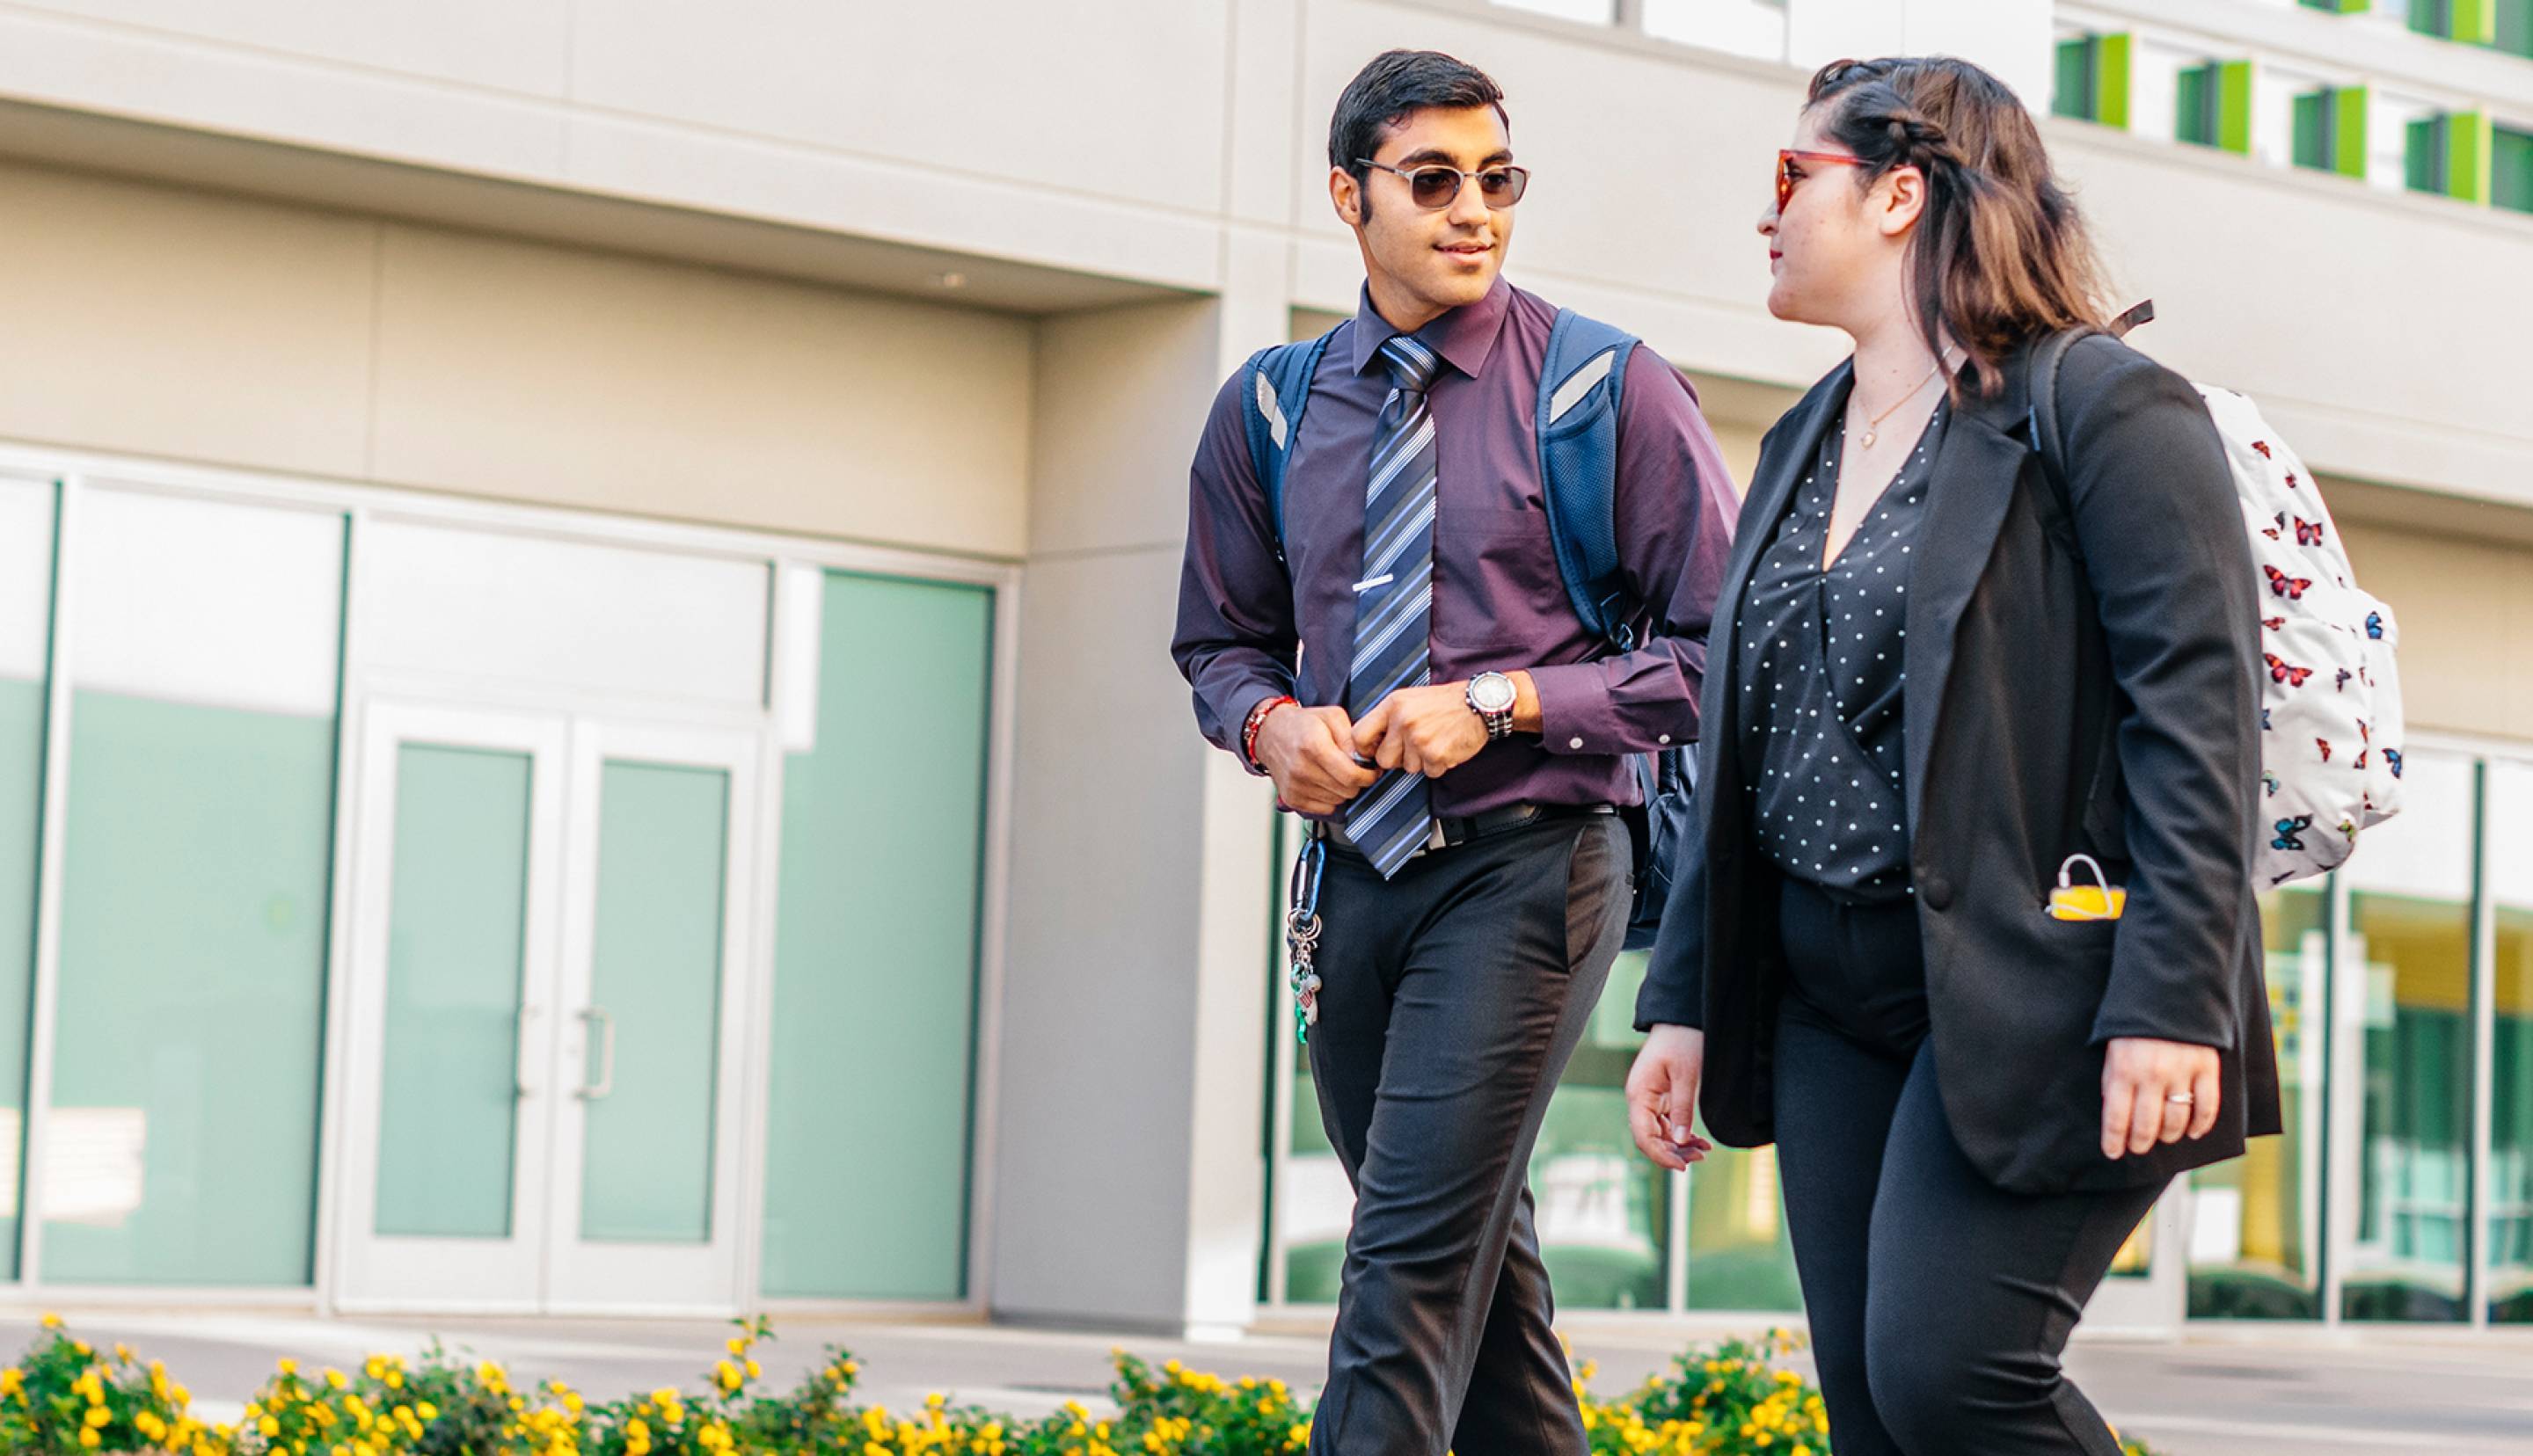 A man with a tie and a woman in business casual walk and talk outside a campus building